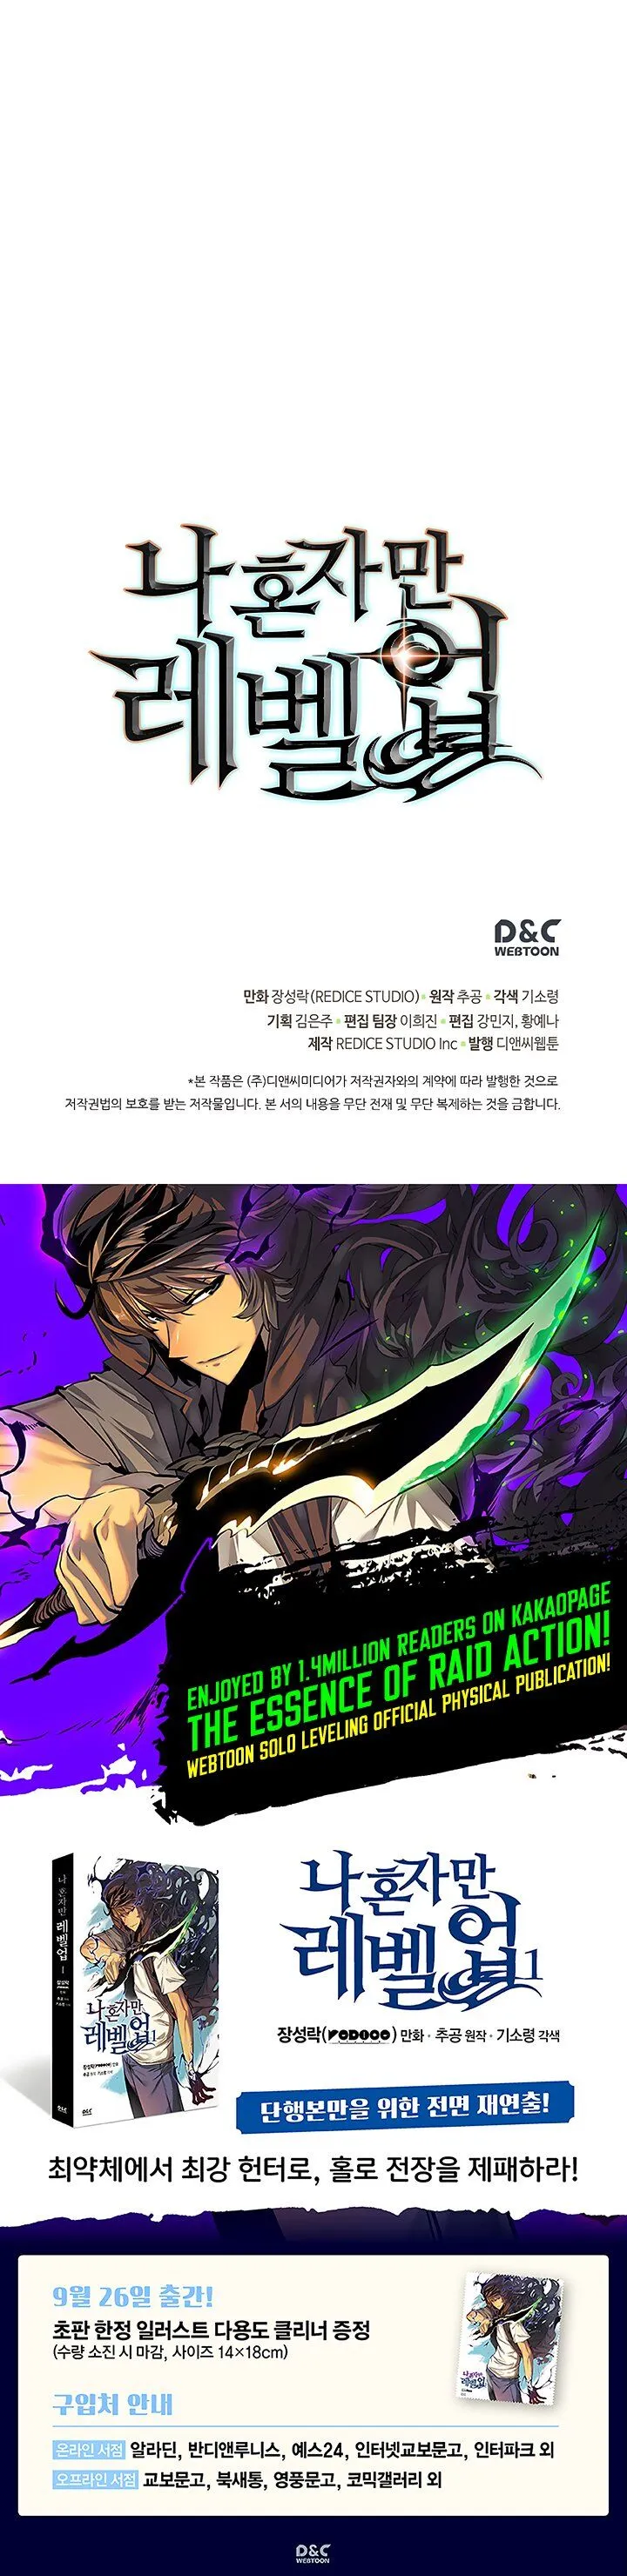 Solo leveling Chapter 089 34